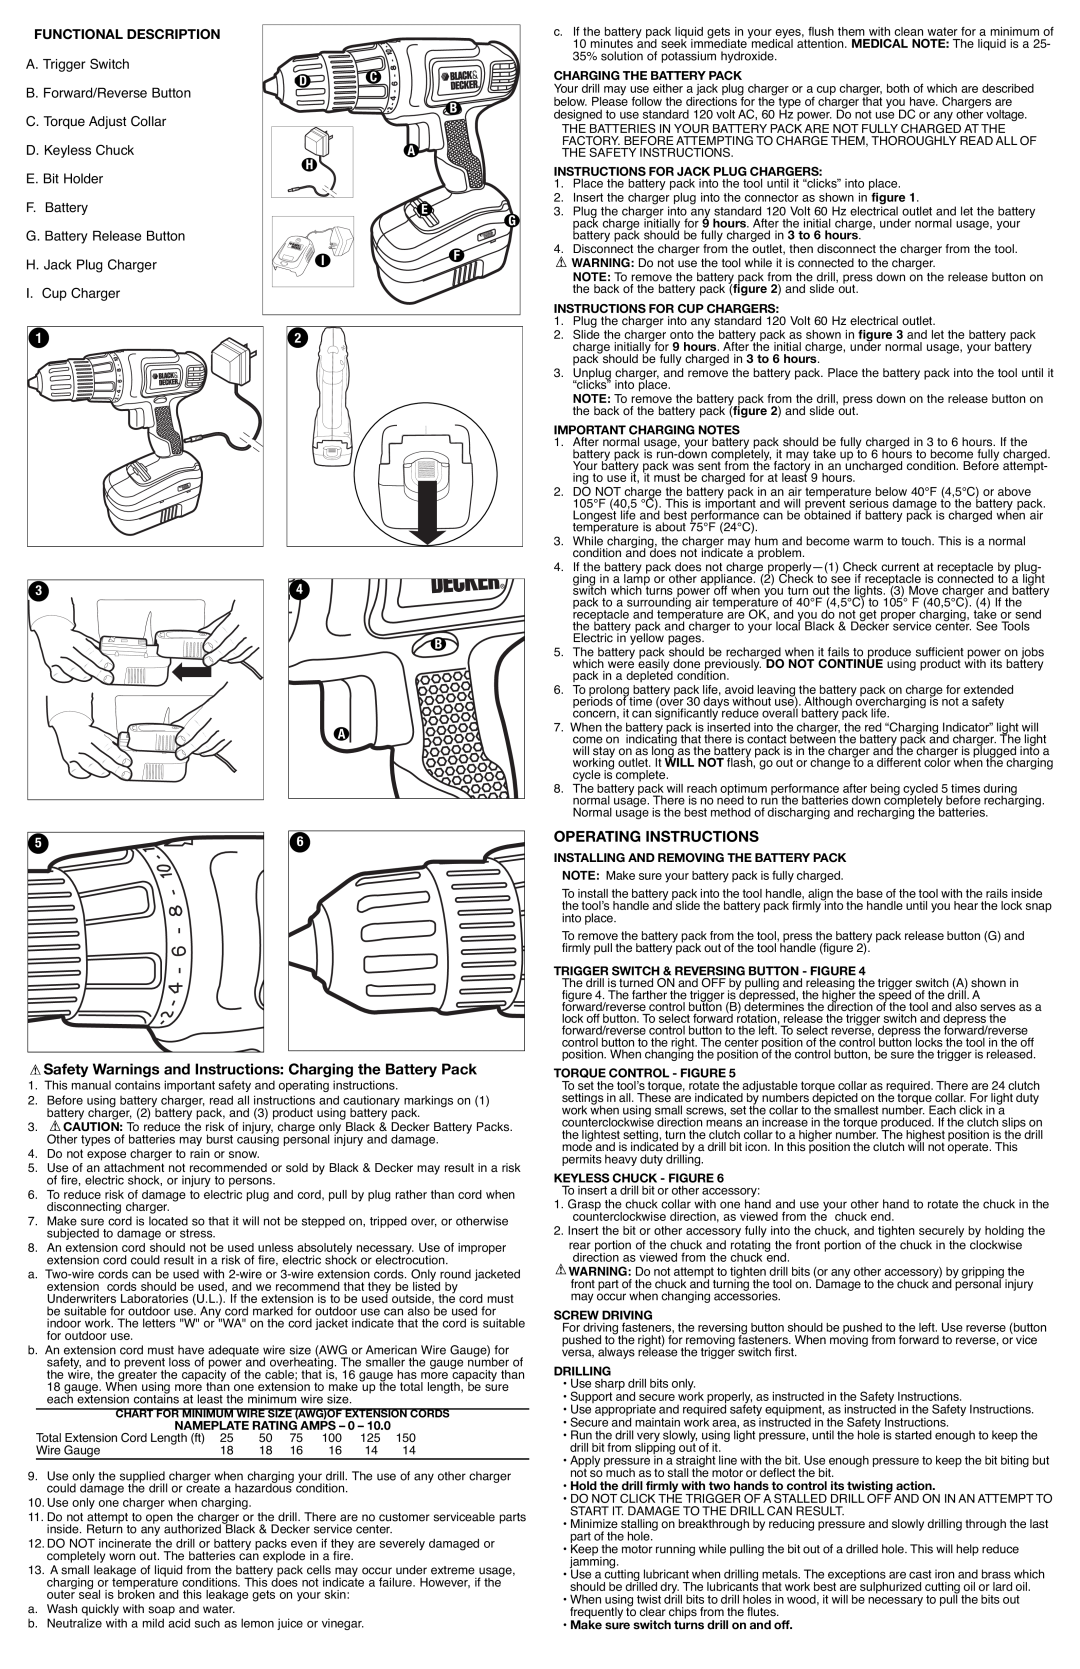 Black & Decker GCO2400 Safety Warnings and Instructions Charging the Battery Pack, Operating Instructions, E. Bit Holder 